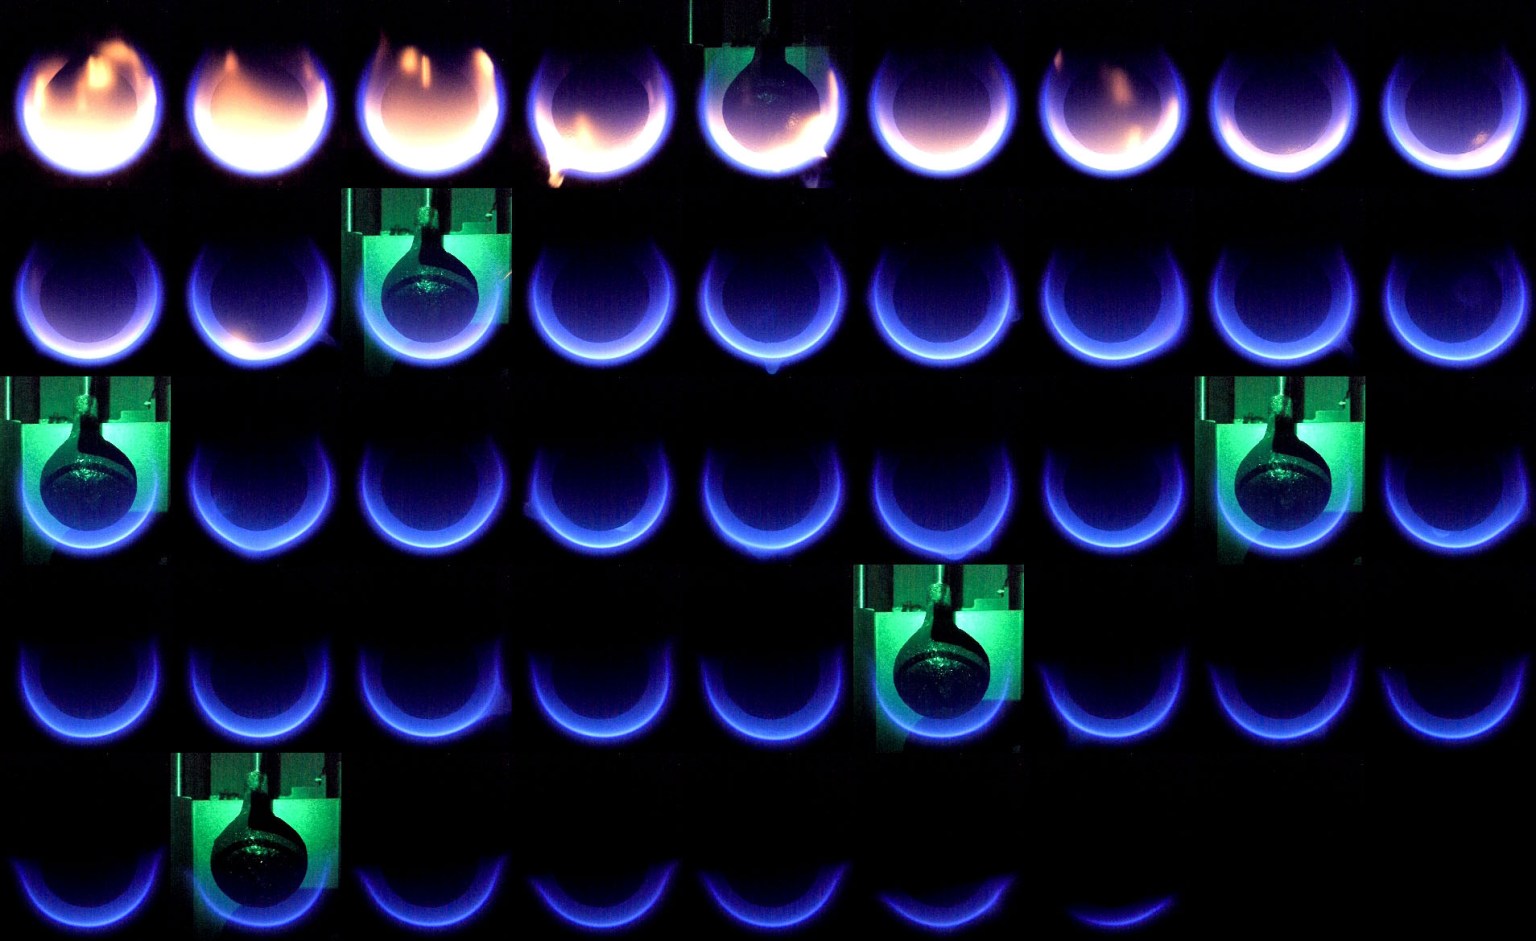 The Solid Fuel Ignition and Extinction (SoFIE) Growth and Extinction Limits (GEL) experiment aboard the International Space Station (ISS) studies flame growth and extinction in an effort to improve fire safety in space. This image shows a sequence of snapshots taken about 3 seconds apart. During this test point, the ambient oxygen concentration starts relatively high (28%). Initially, the flame is seen as yellow and sooty. As the ambient pressure is reduced, the flame becomes bluer and continues to shrink until fully extinguished. This gives researchers pressure limit data points for flame extinction that could help improve crew and spacecraft safety for future exploration missions.